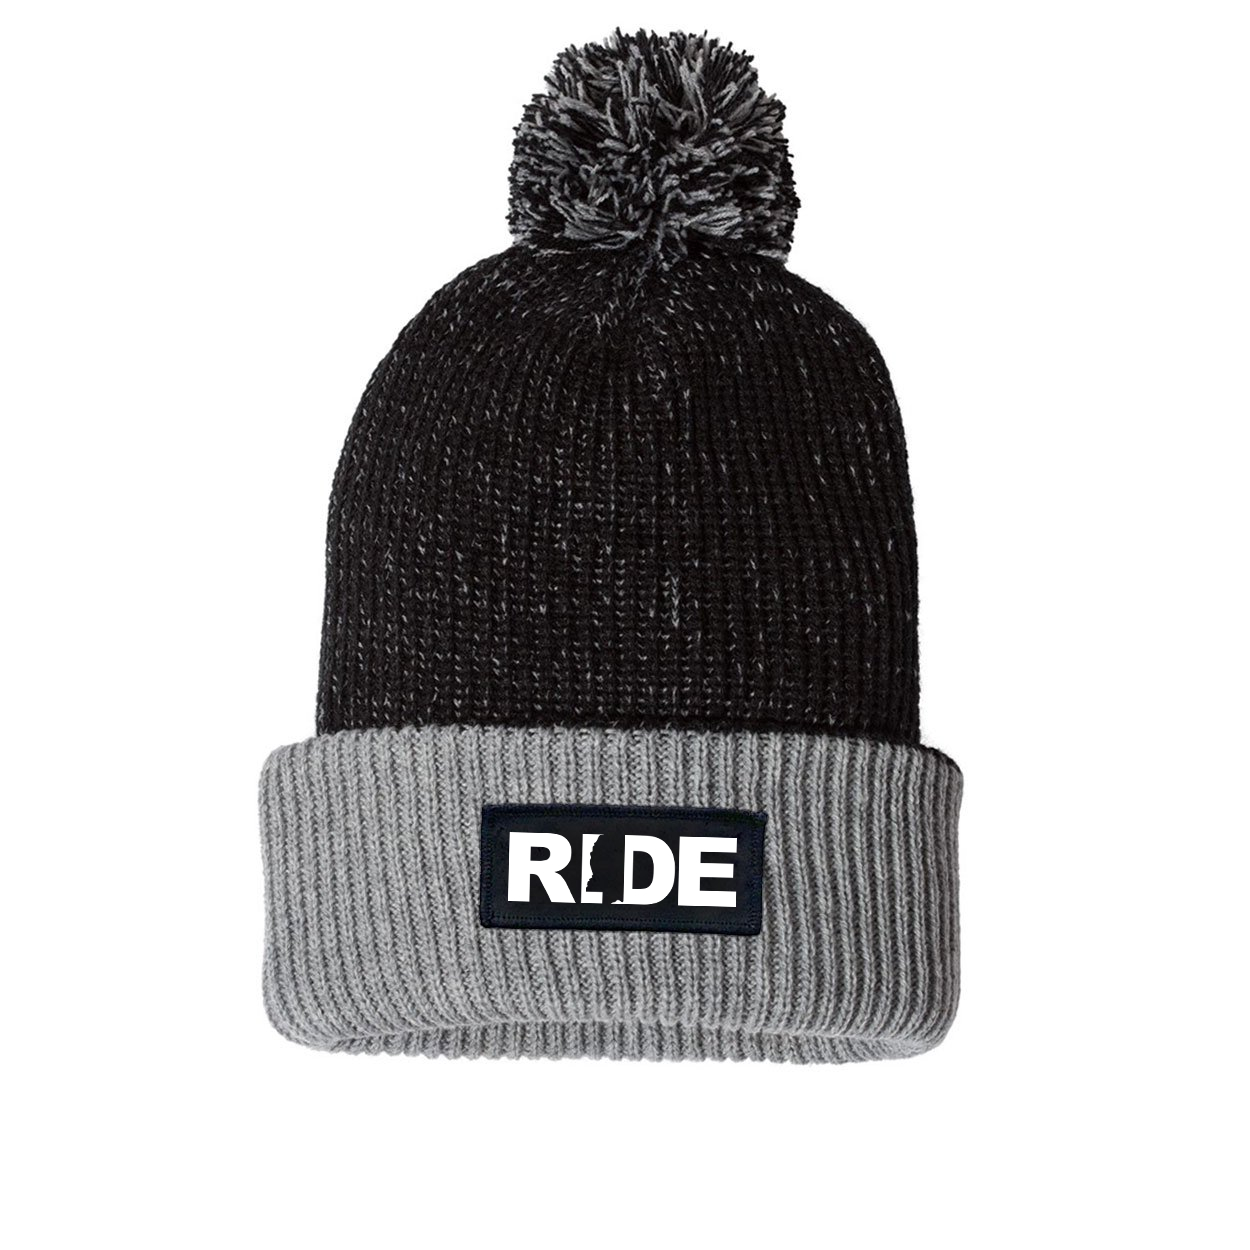 Ride Mississippi Night Out Woven Patch Roll Up Pom Knit Beanie Black/Gray (White Logo)